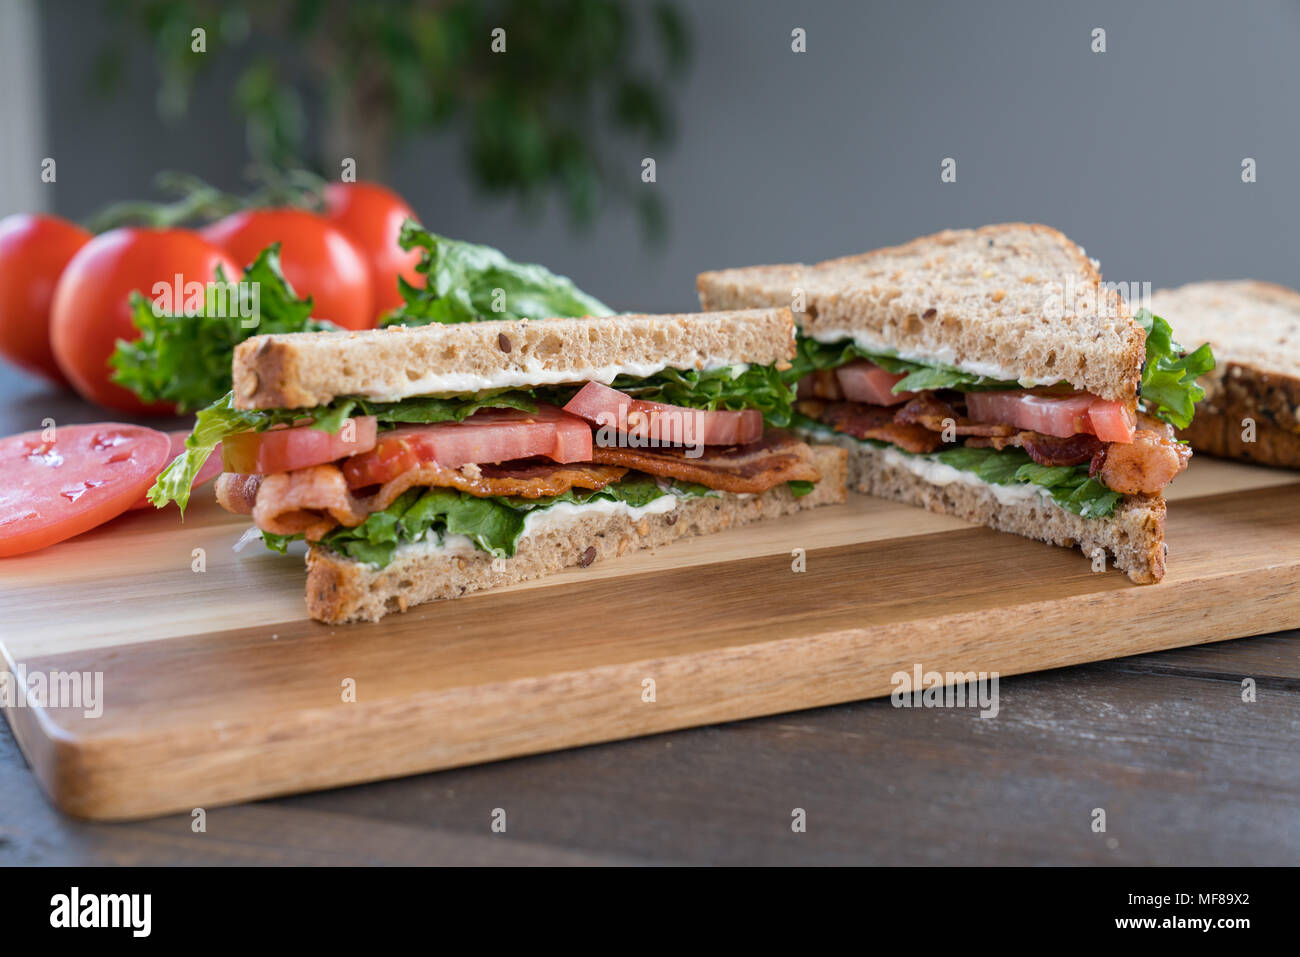 Fresh Bacon, Lettuce and Tomato Sandwich on a Cutting Board Stock Photo